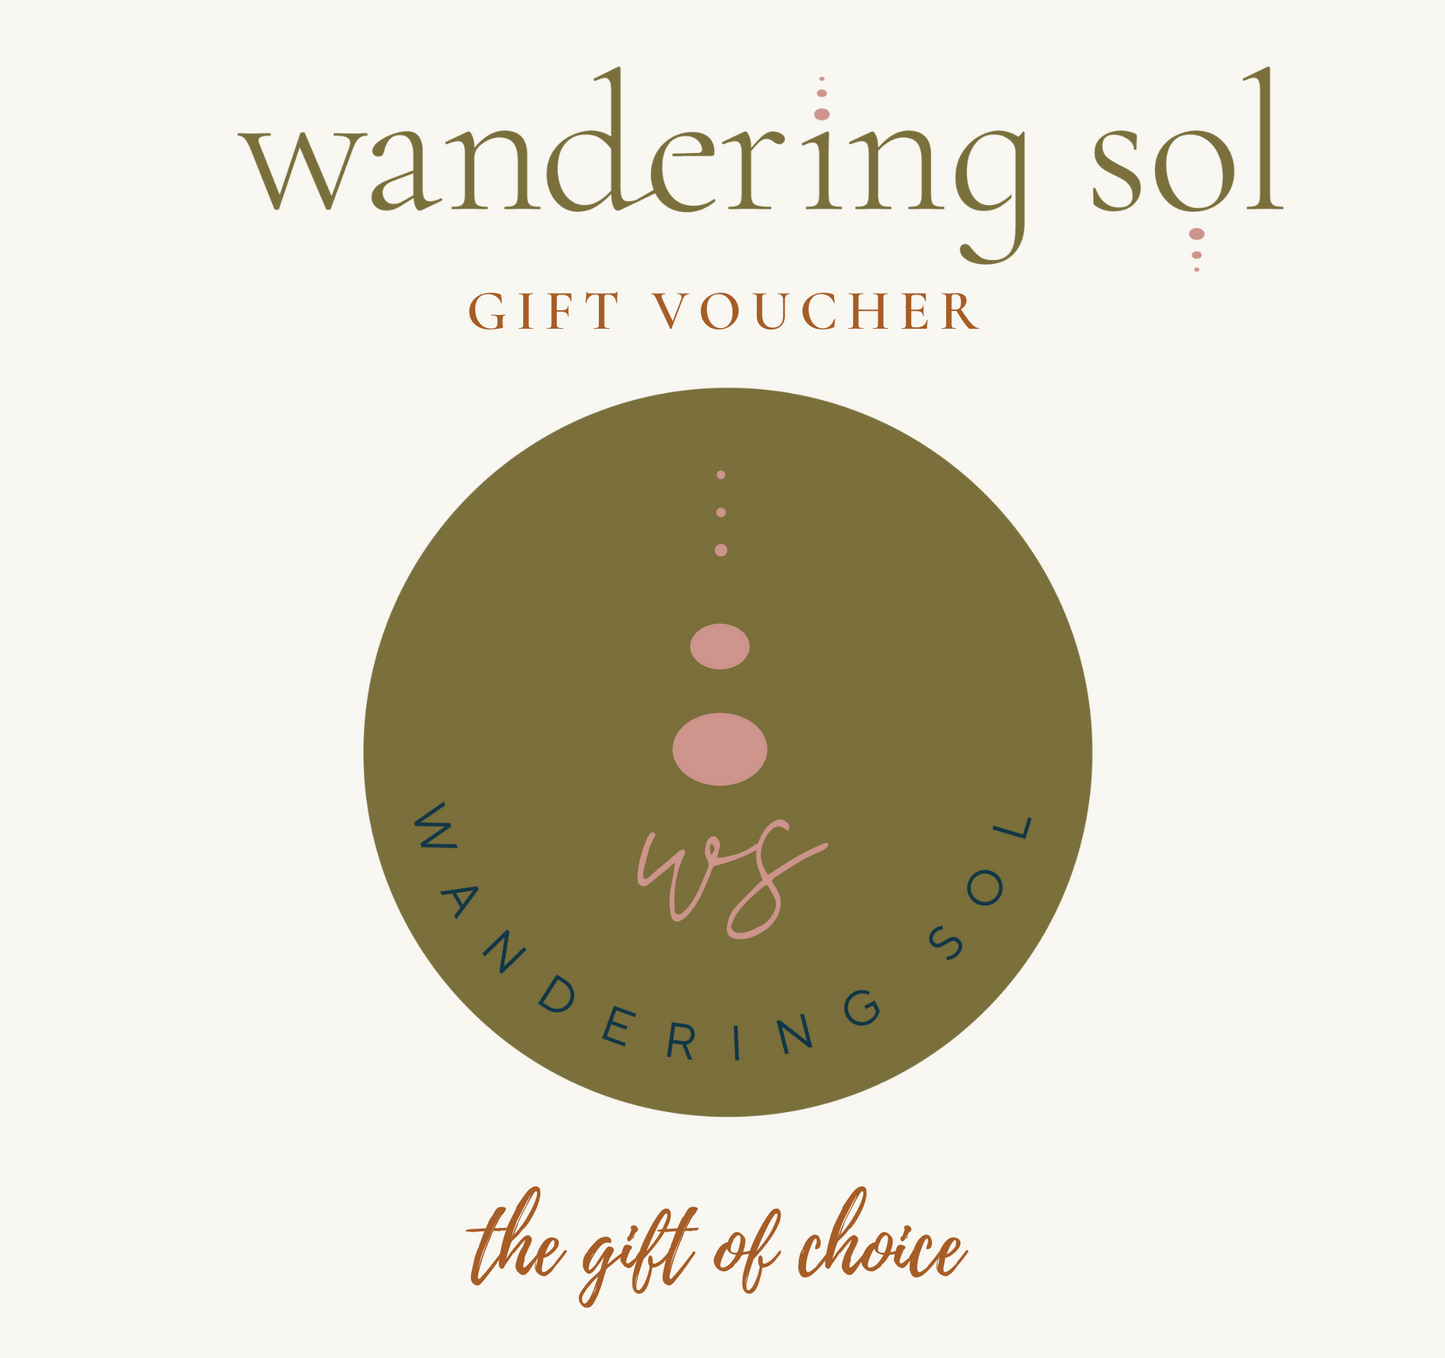 Wandering Sol Gift Voucher. The Gift of choice.